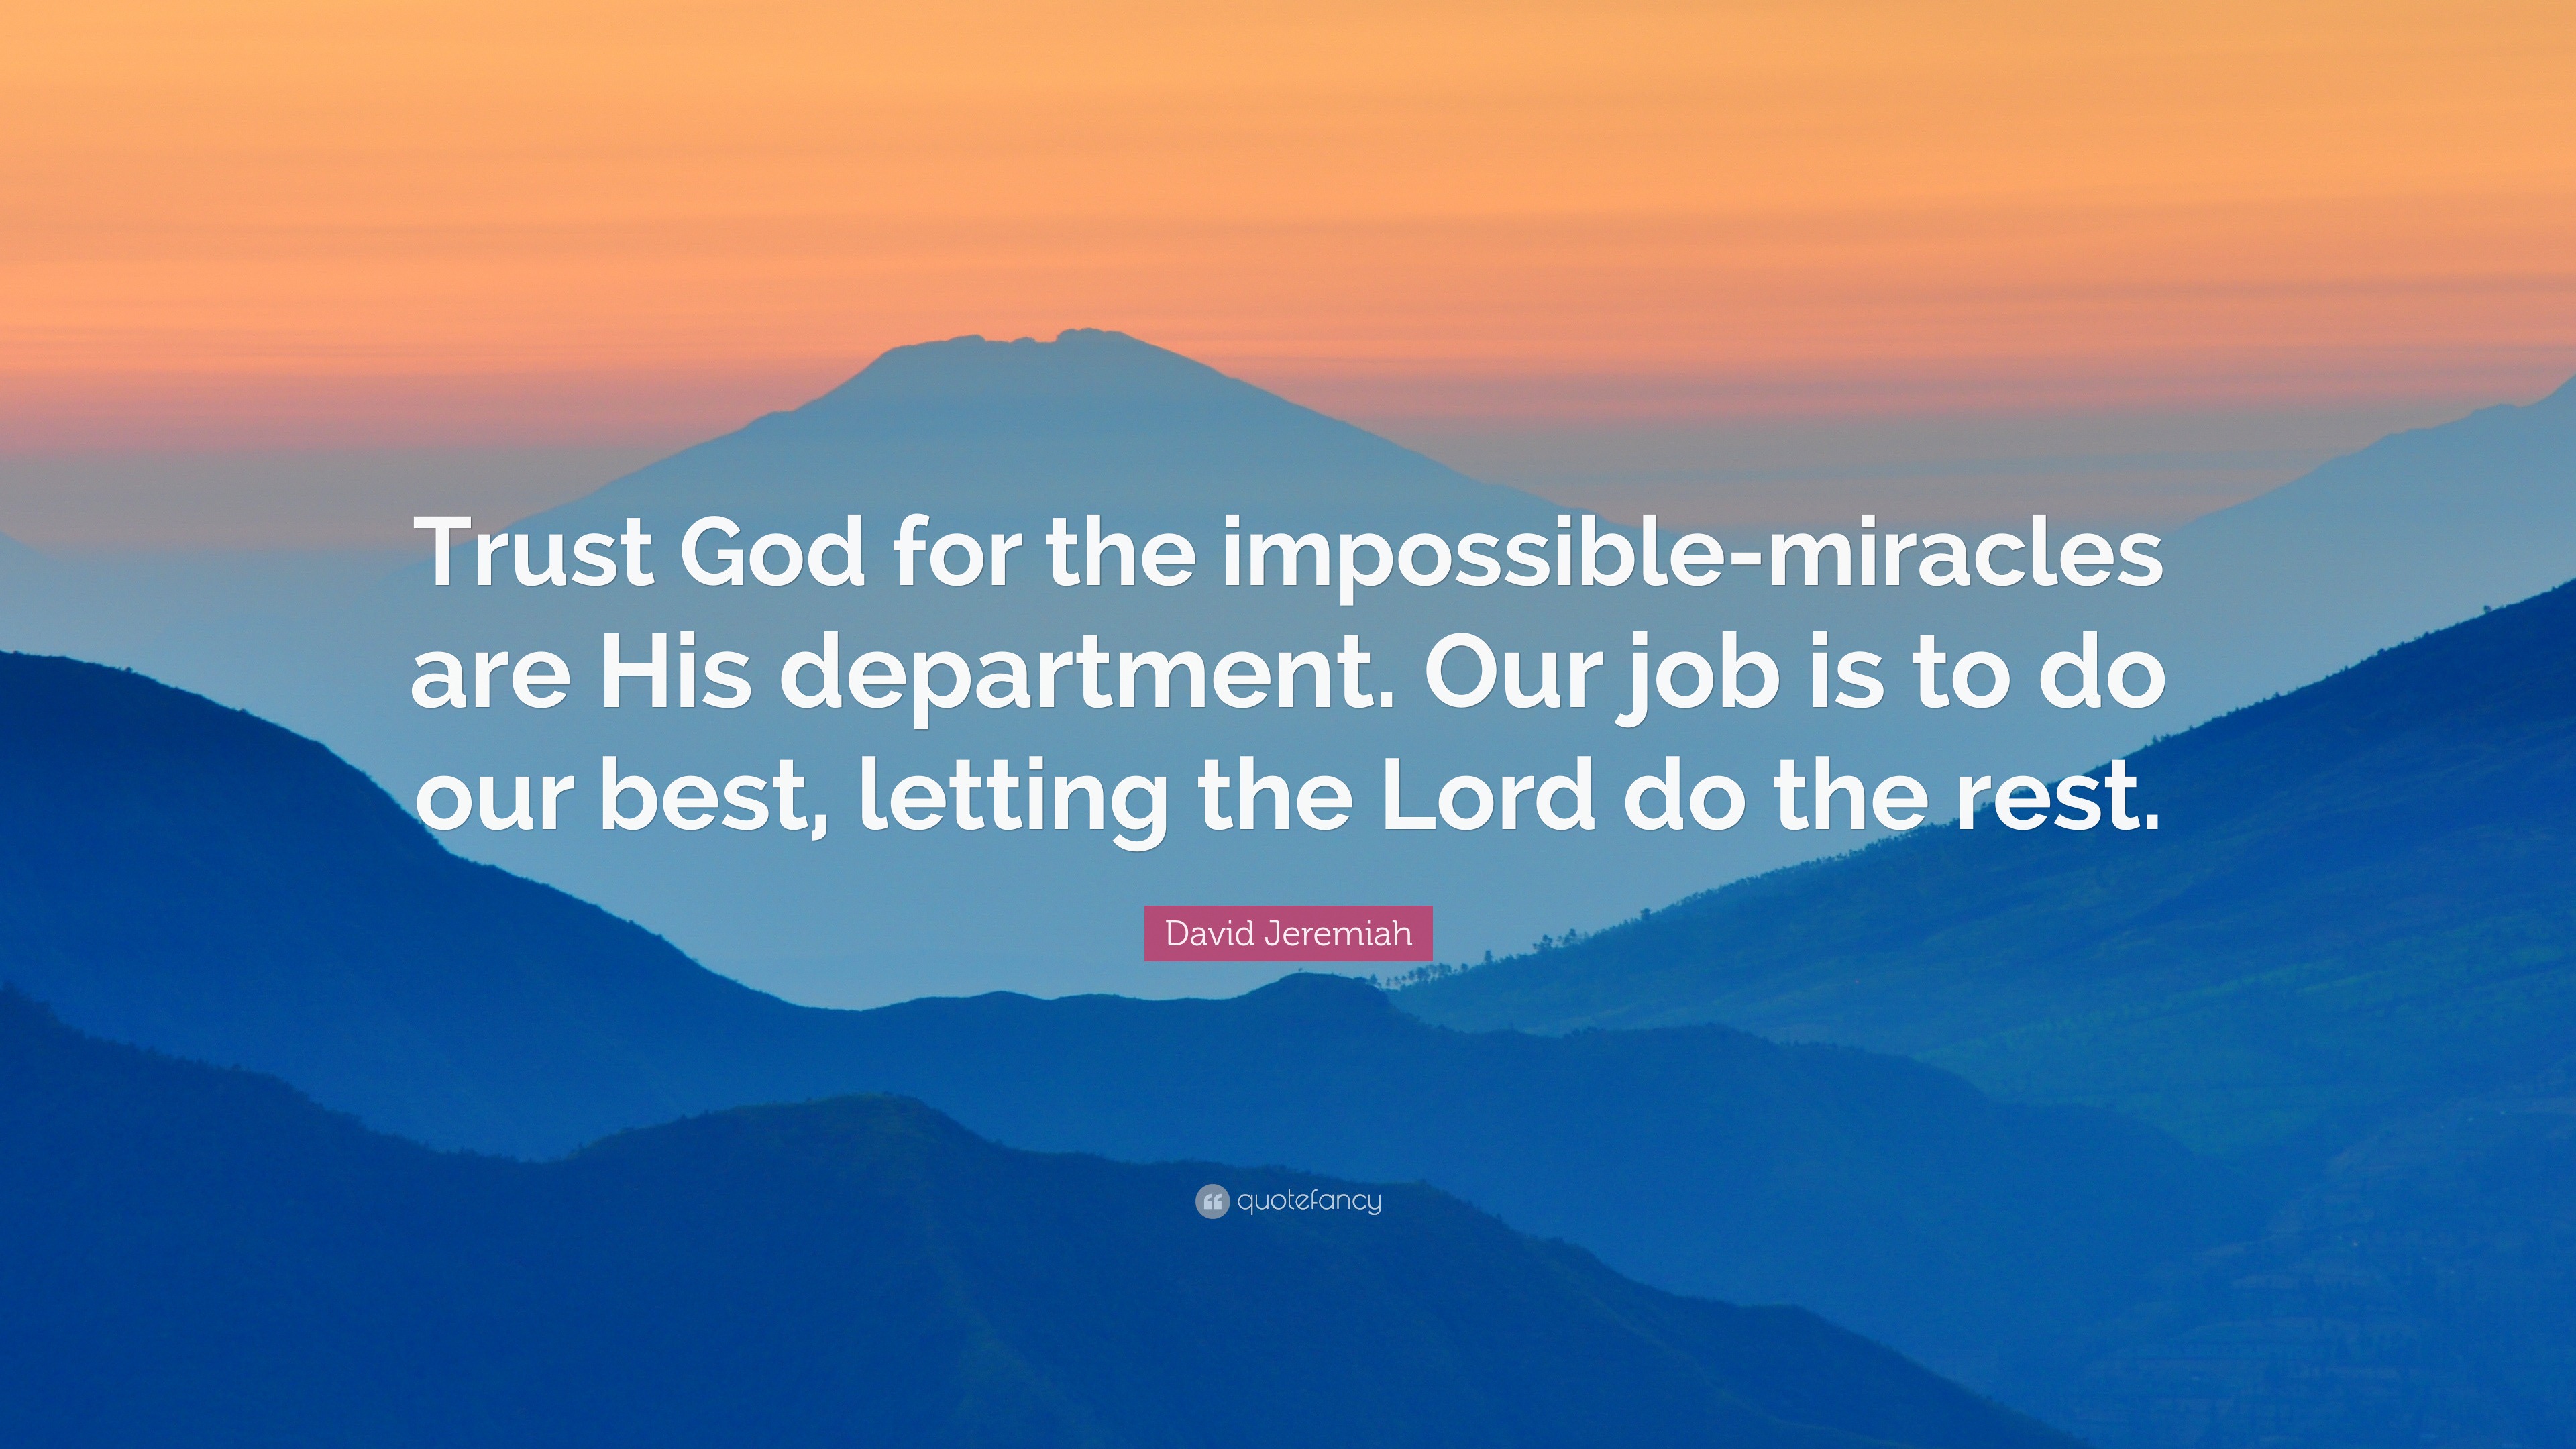 David Jeremiah Quote “Trust God for the impossible